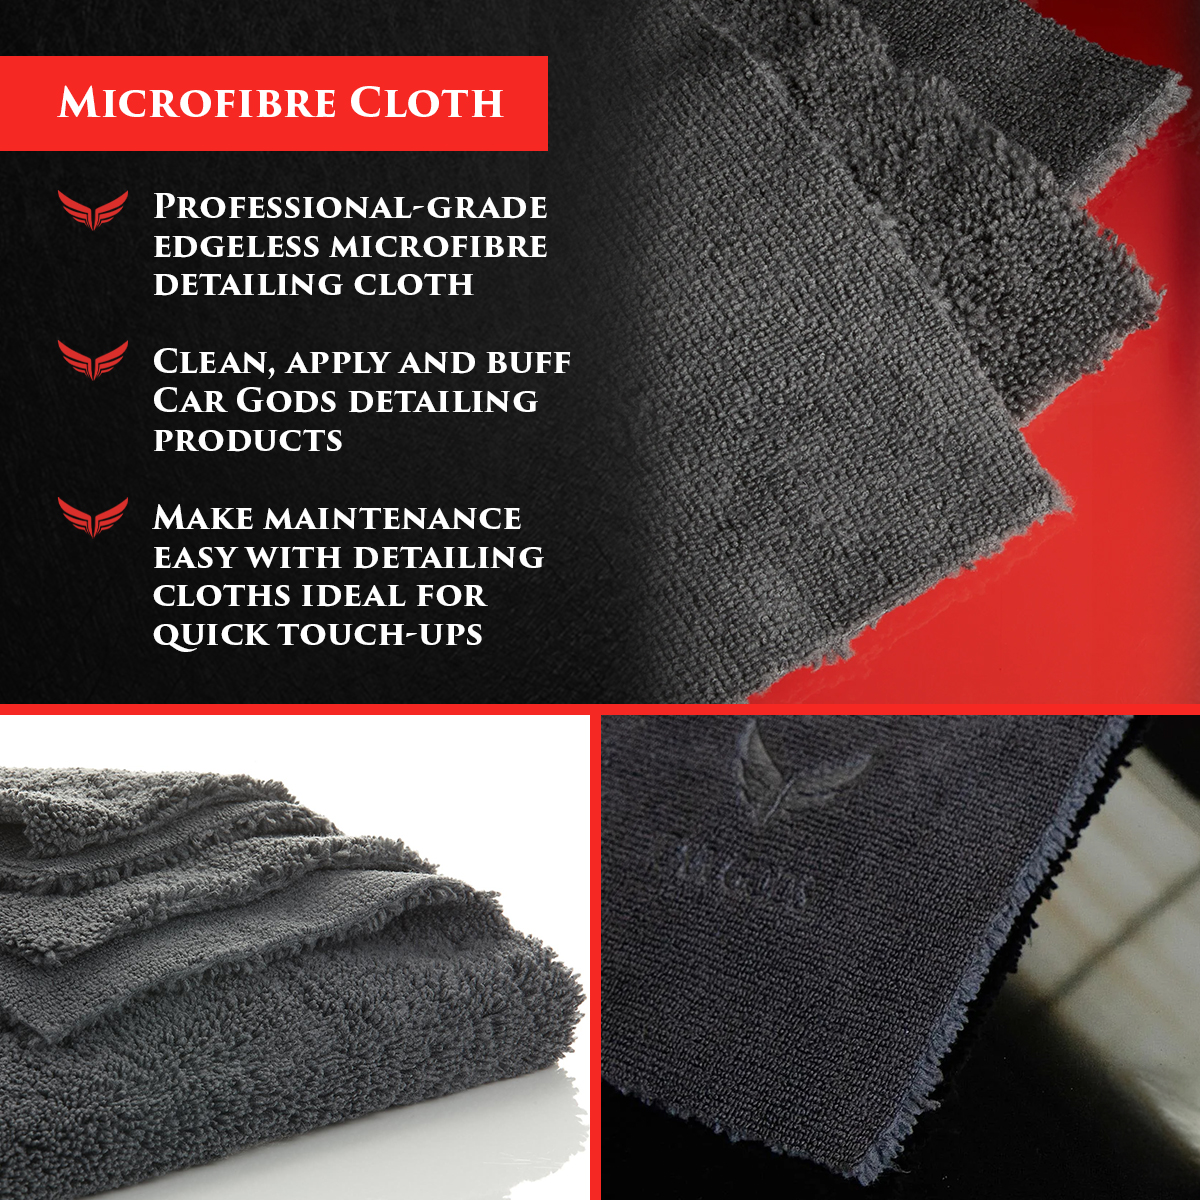 Car Gods Microfibre Cloth. Achieve a scratch-free showroom shine with a professional-grade edgeless microfibre detailing cloth. Clean, apply and buff your favourite Car Gods detailing products, making maintenance easy and elevating your car care experience.